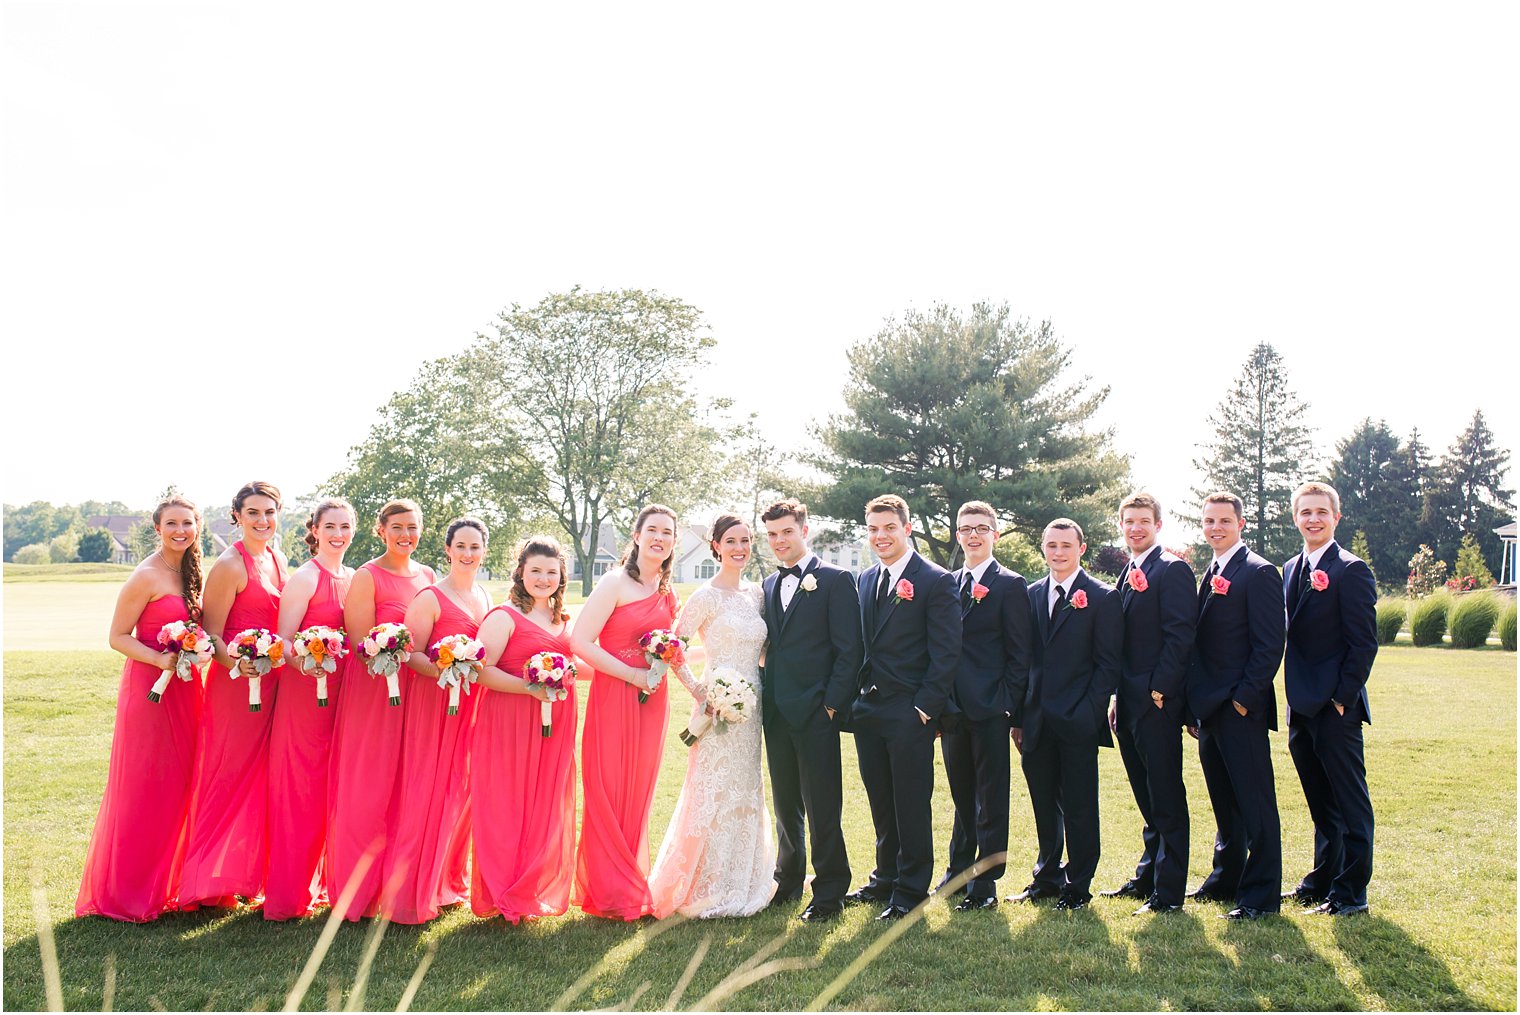 Classic bridal party photo